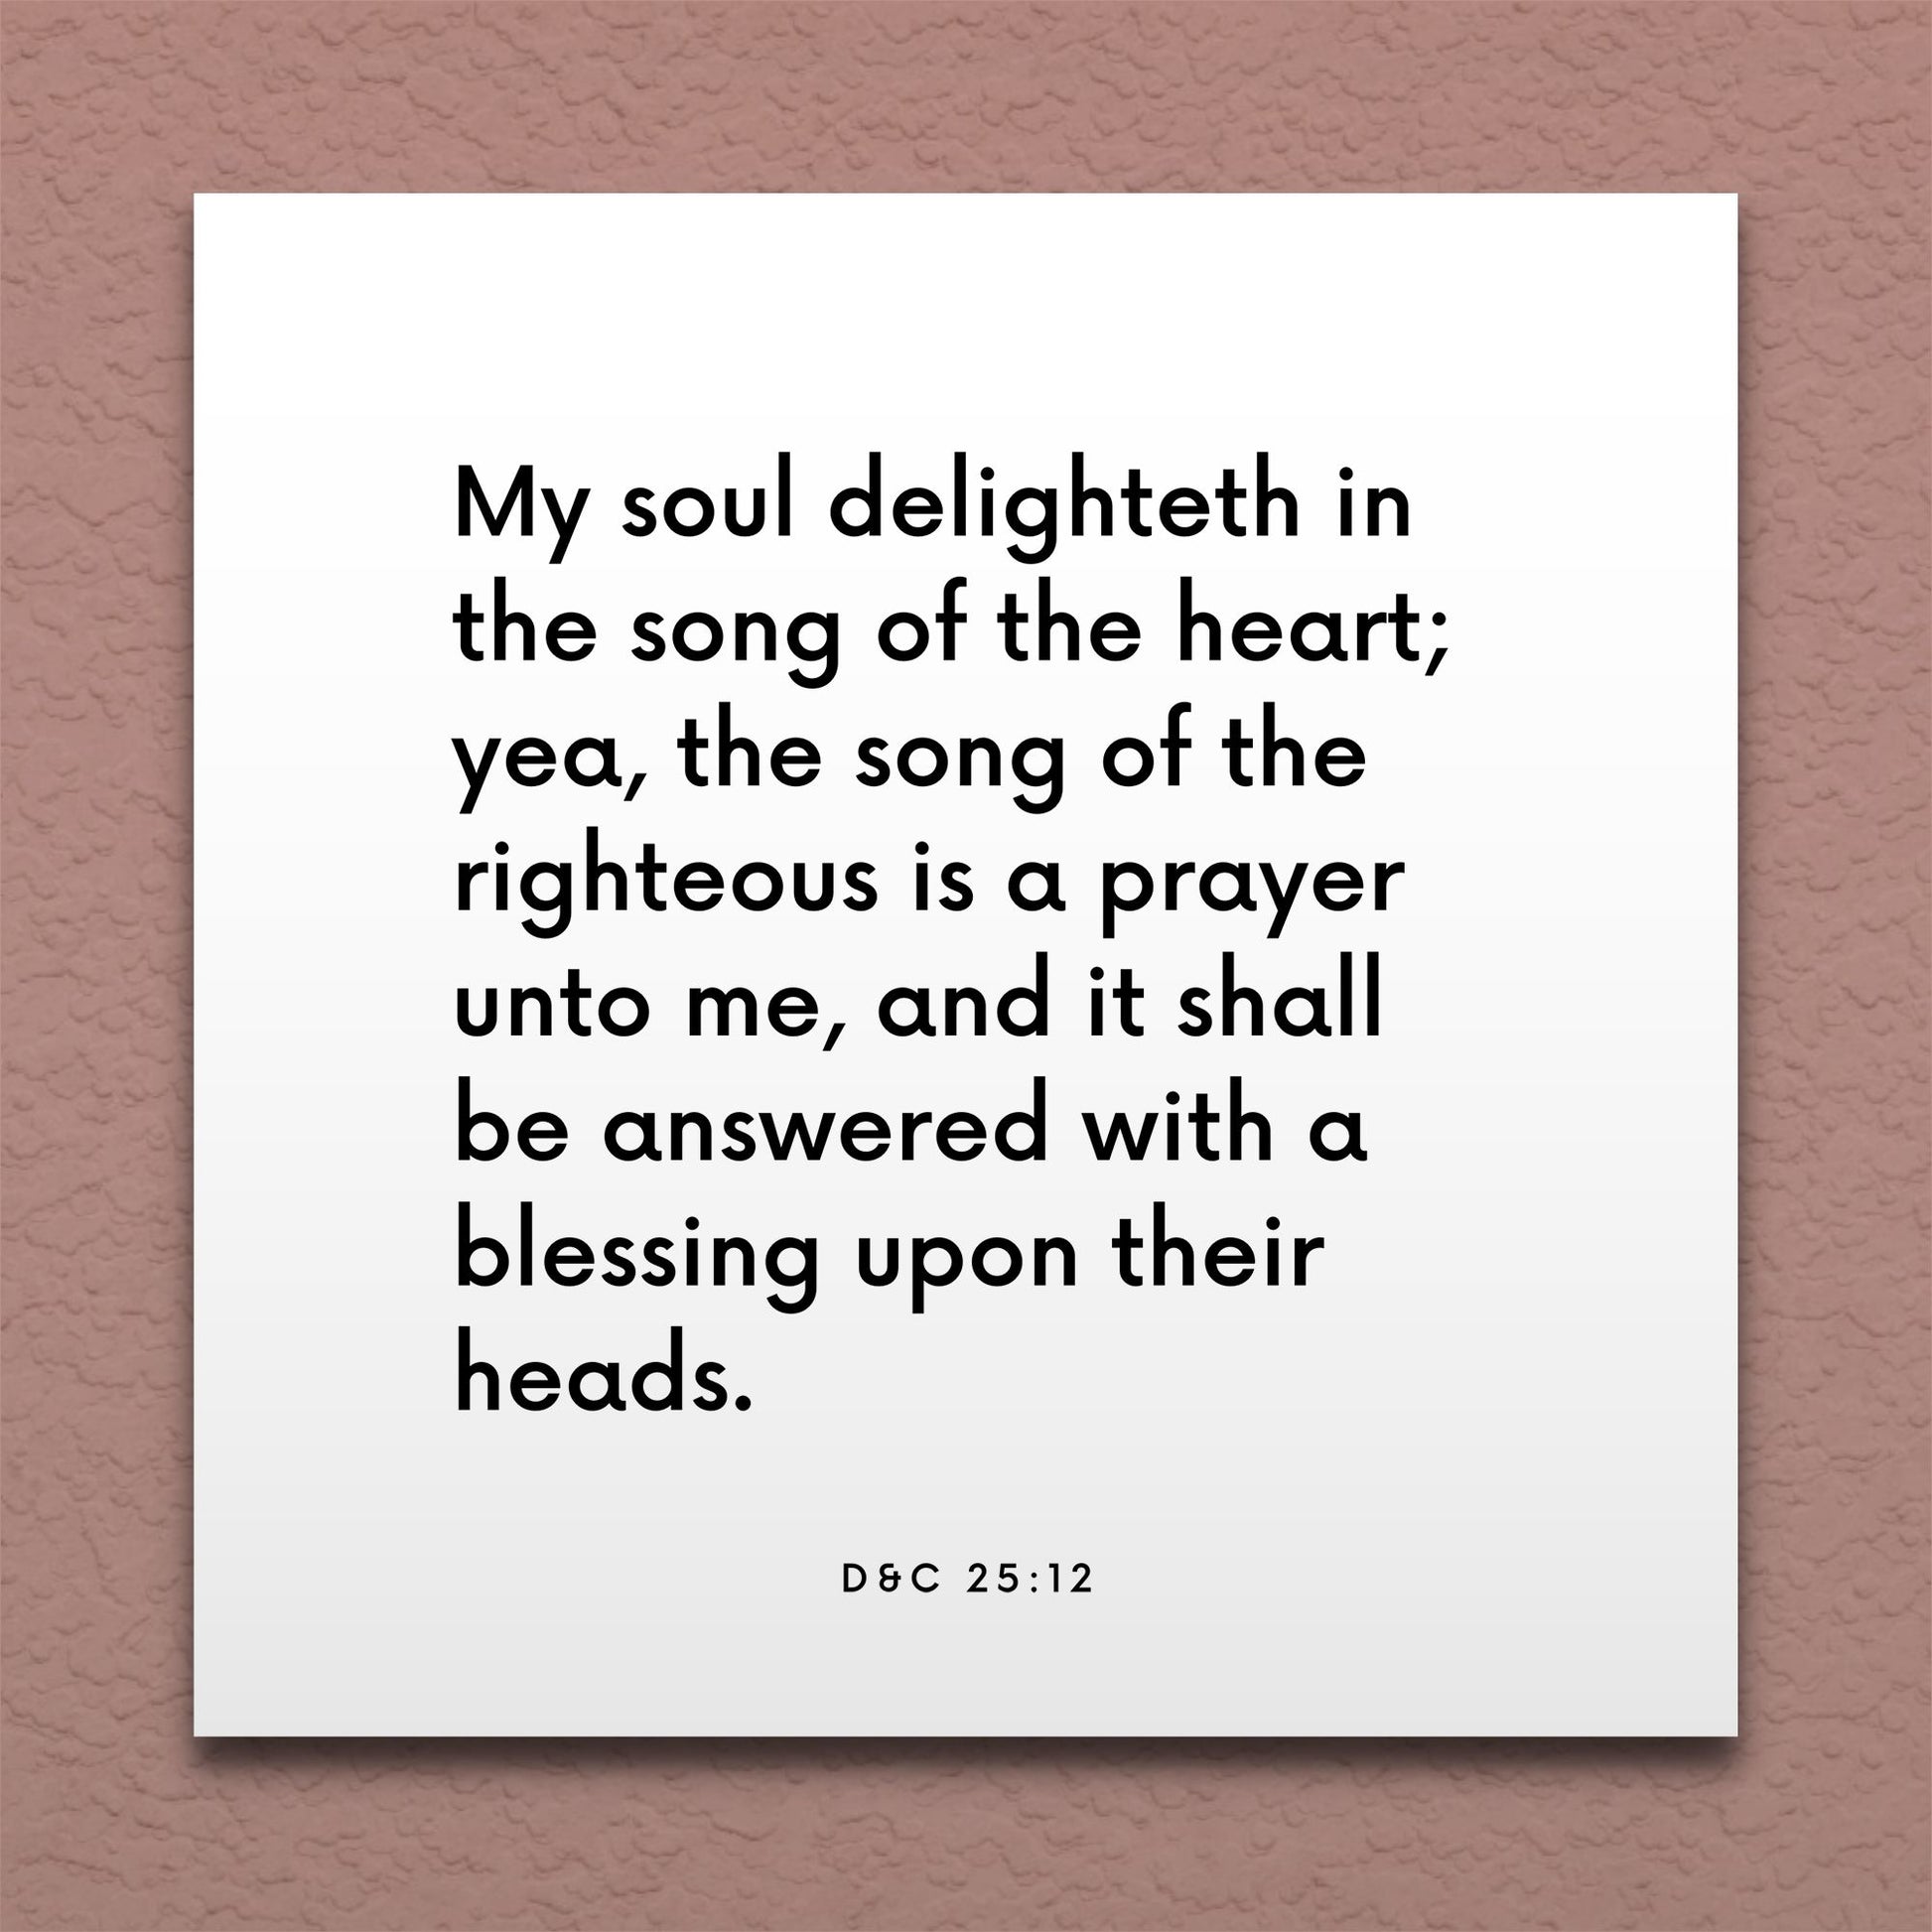 Wall-mounted scripture tile for D&C 25:12 - "The song of the righteous is a prayer unto me"